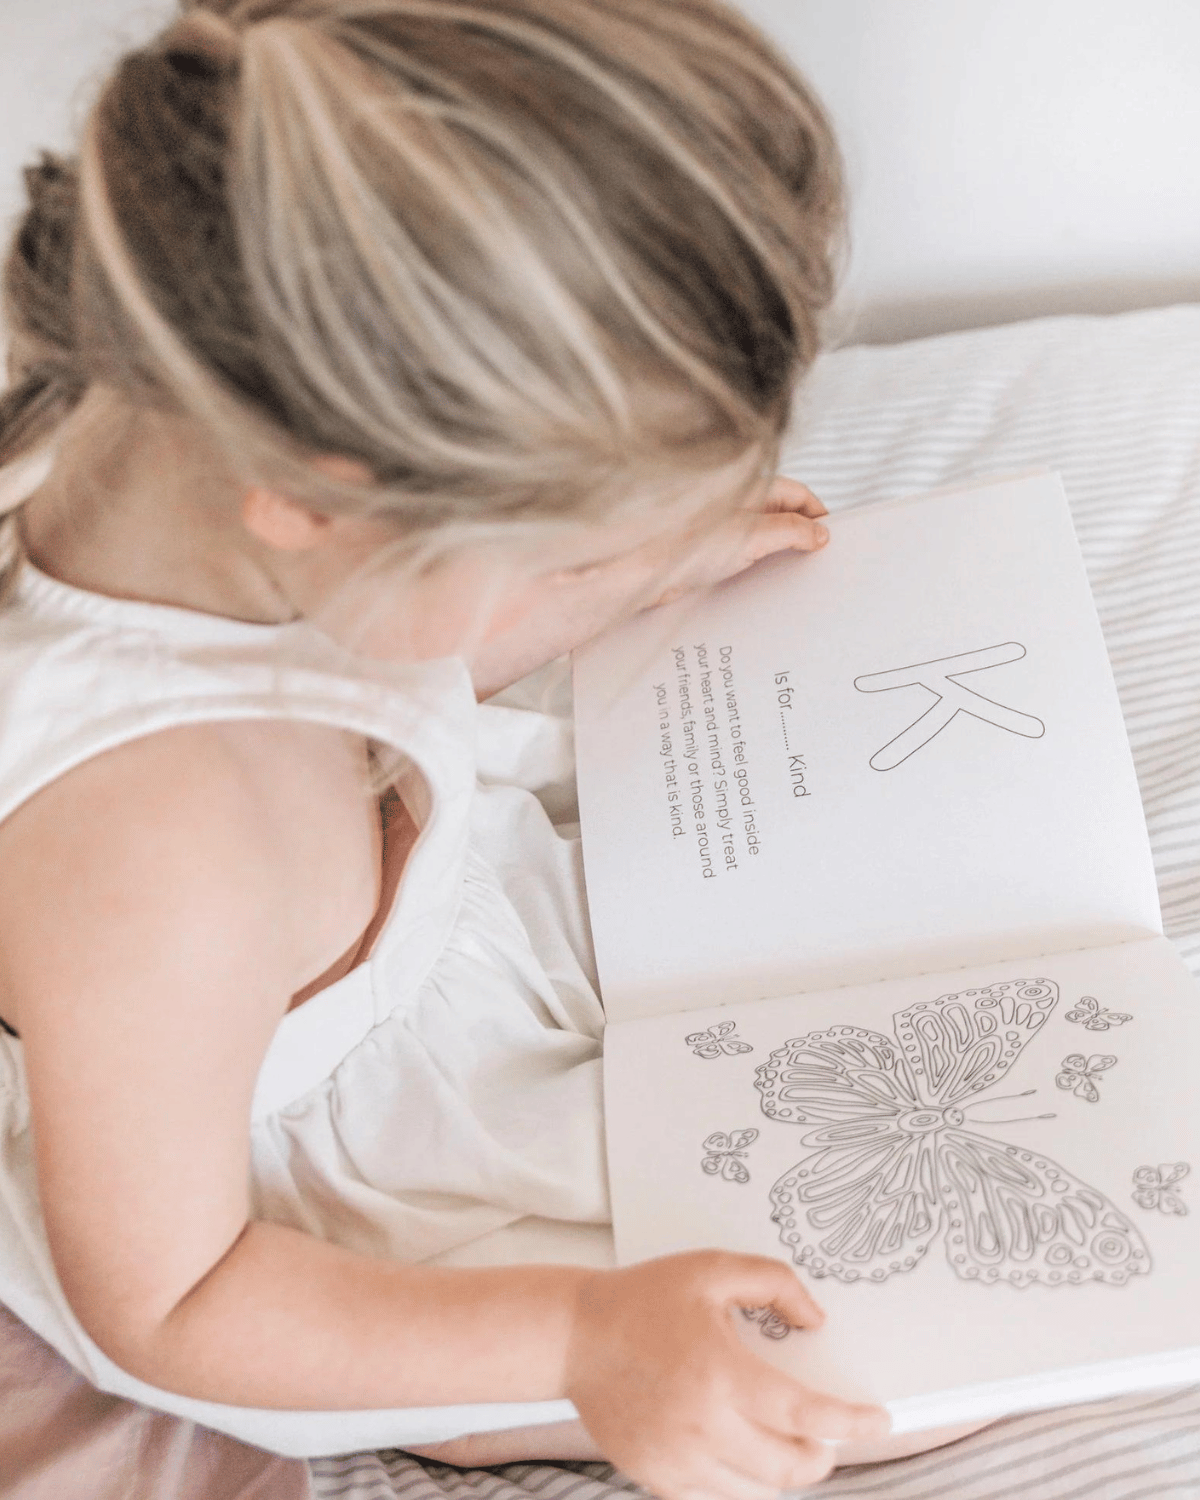 ABCs of Mindfulness Colouring Book by Mindful &amp;amp; Co Kids